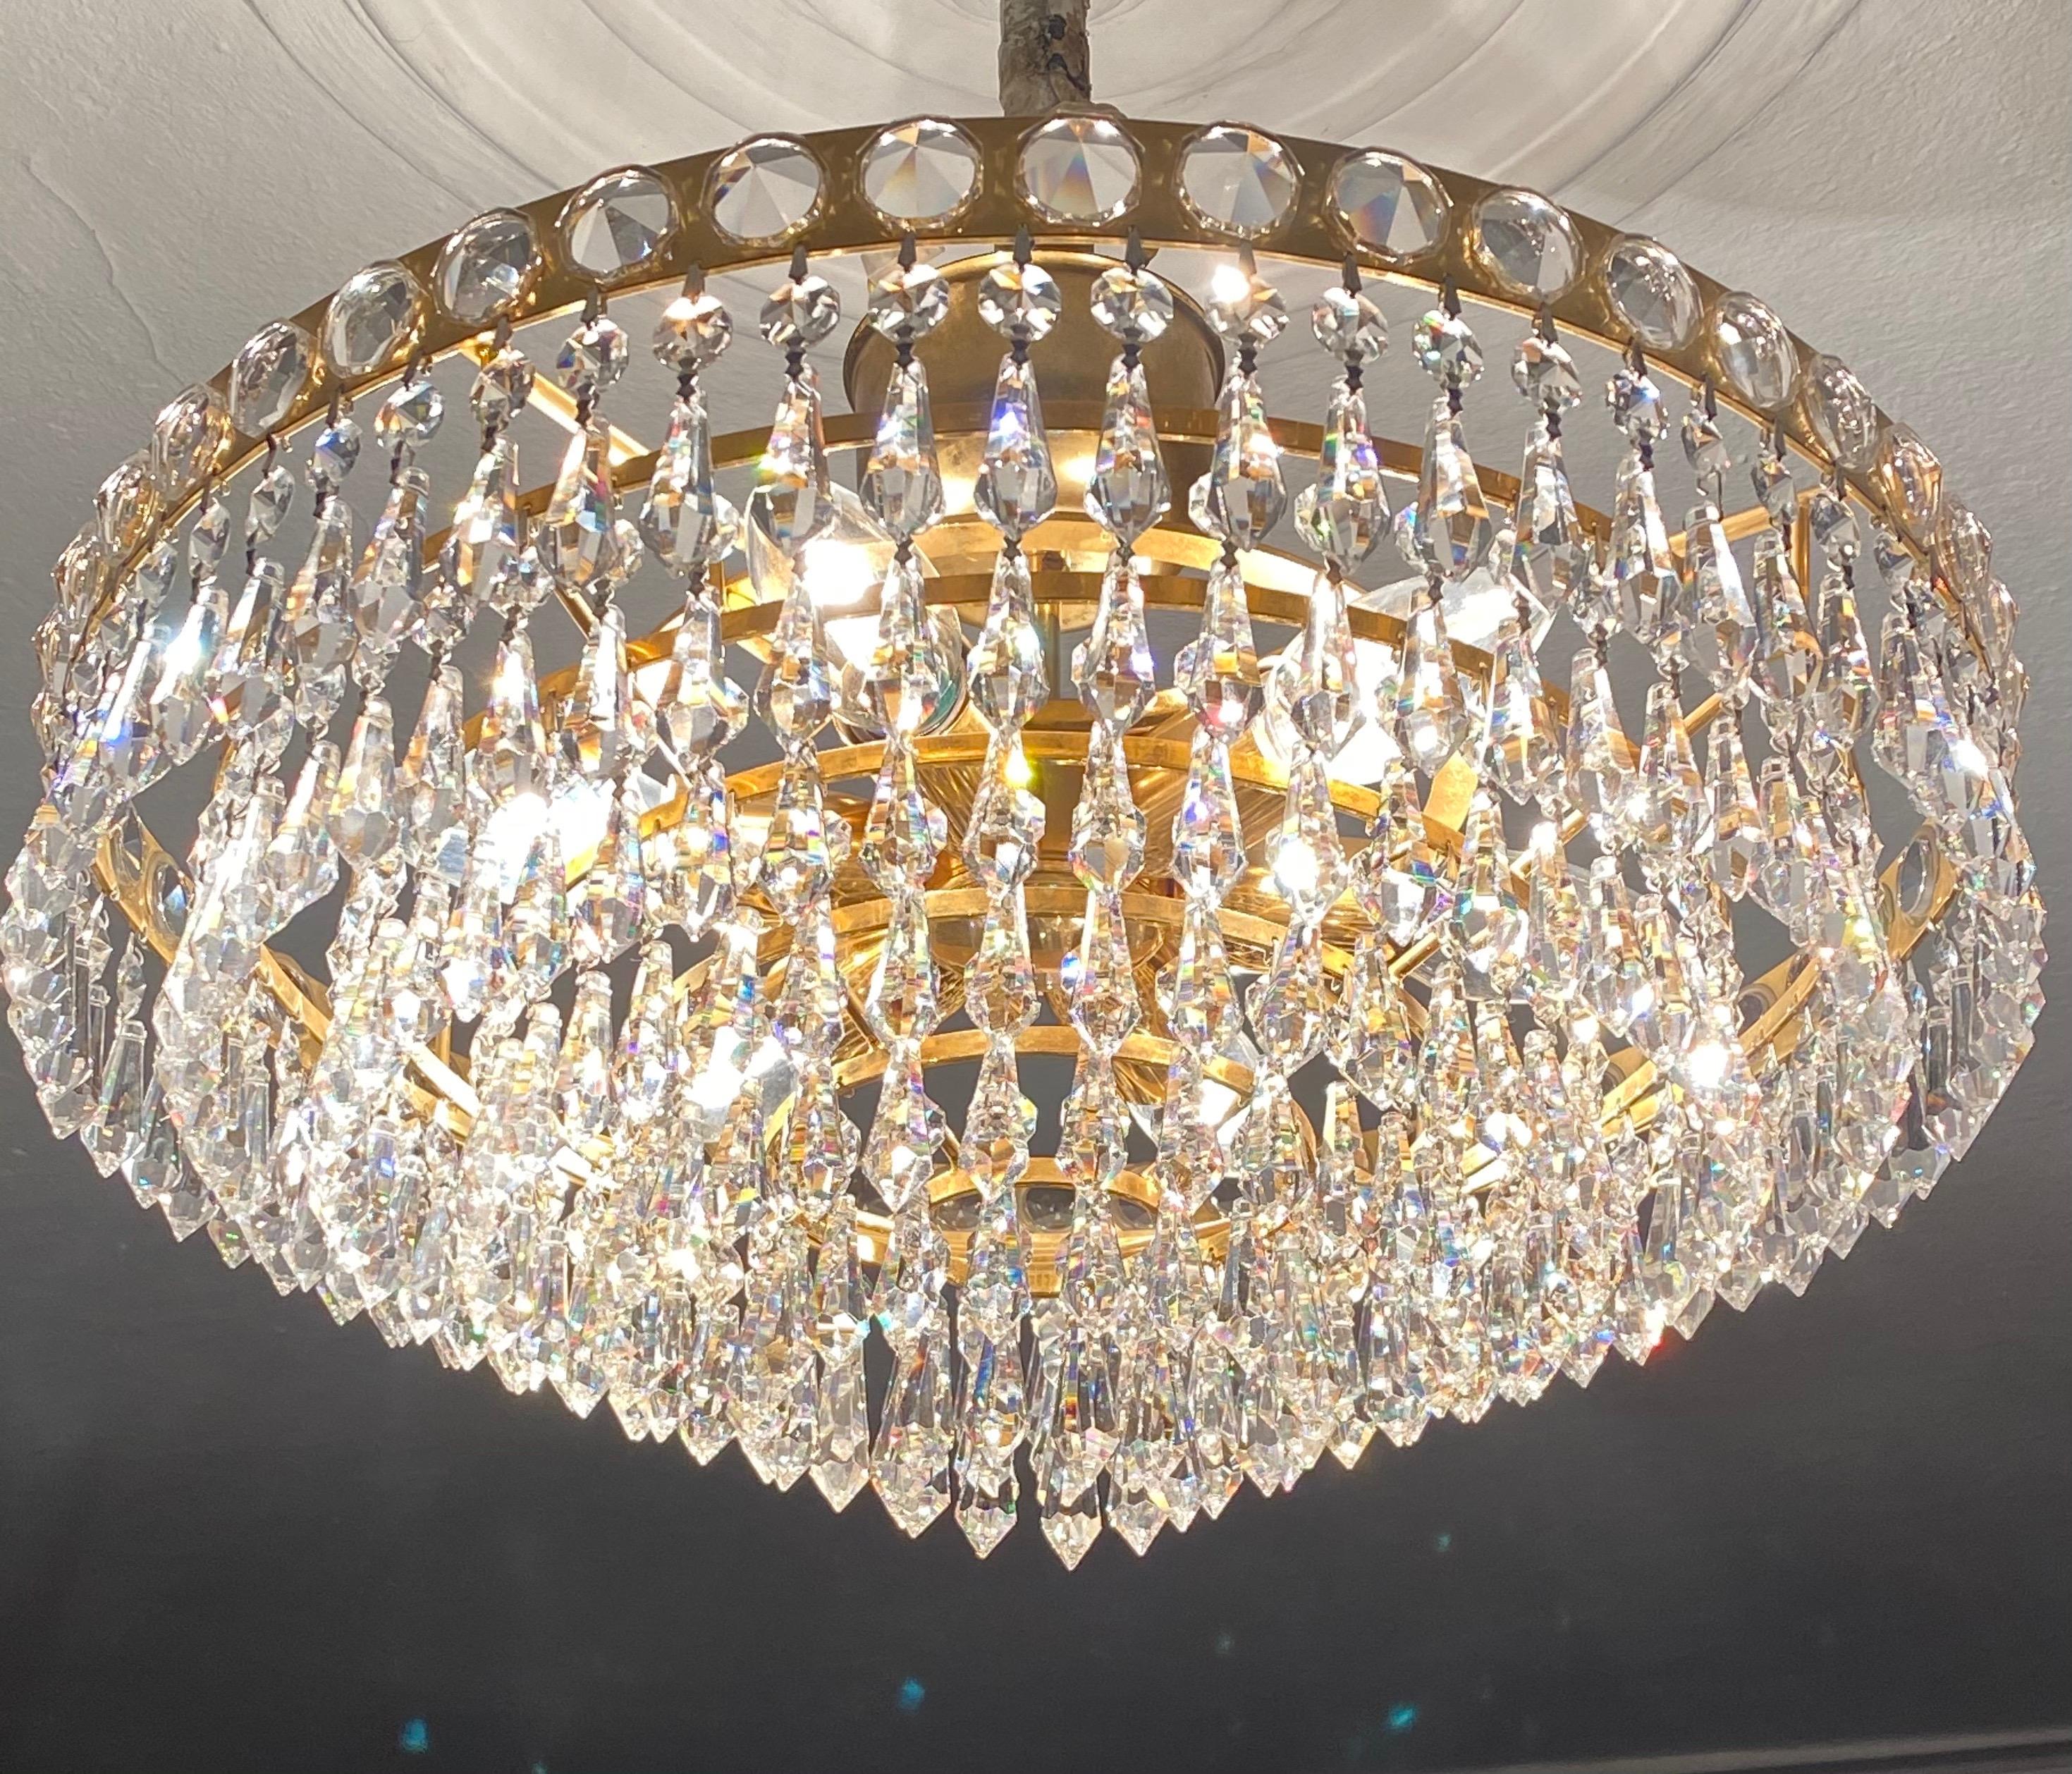 A 1970s strass/Swarovski, lead crystal - chandelier by the traditional maker: 